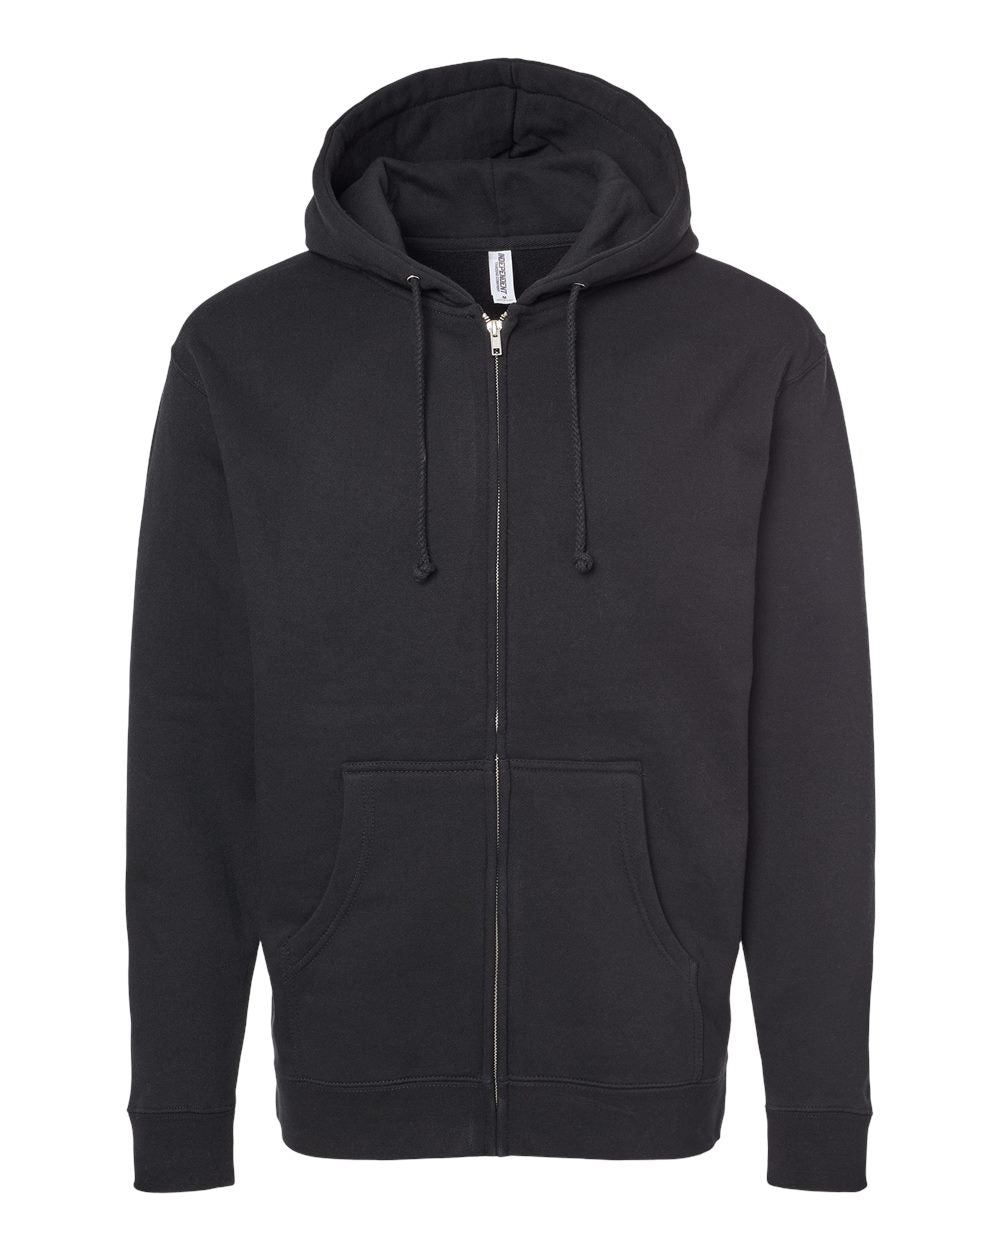 Independent Trading Co. Heavyweight Full-Zip Hooded Sweatshirt IND4000Z #color_Black